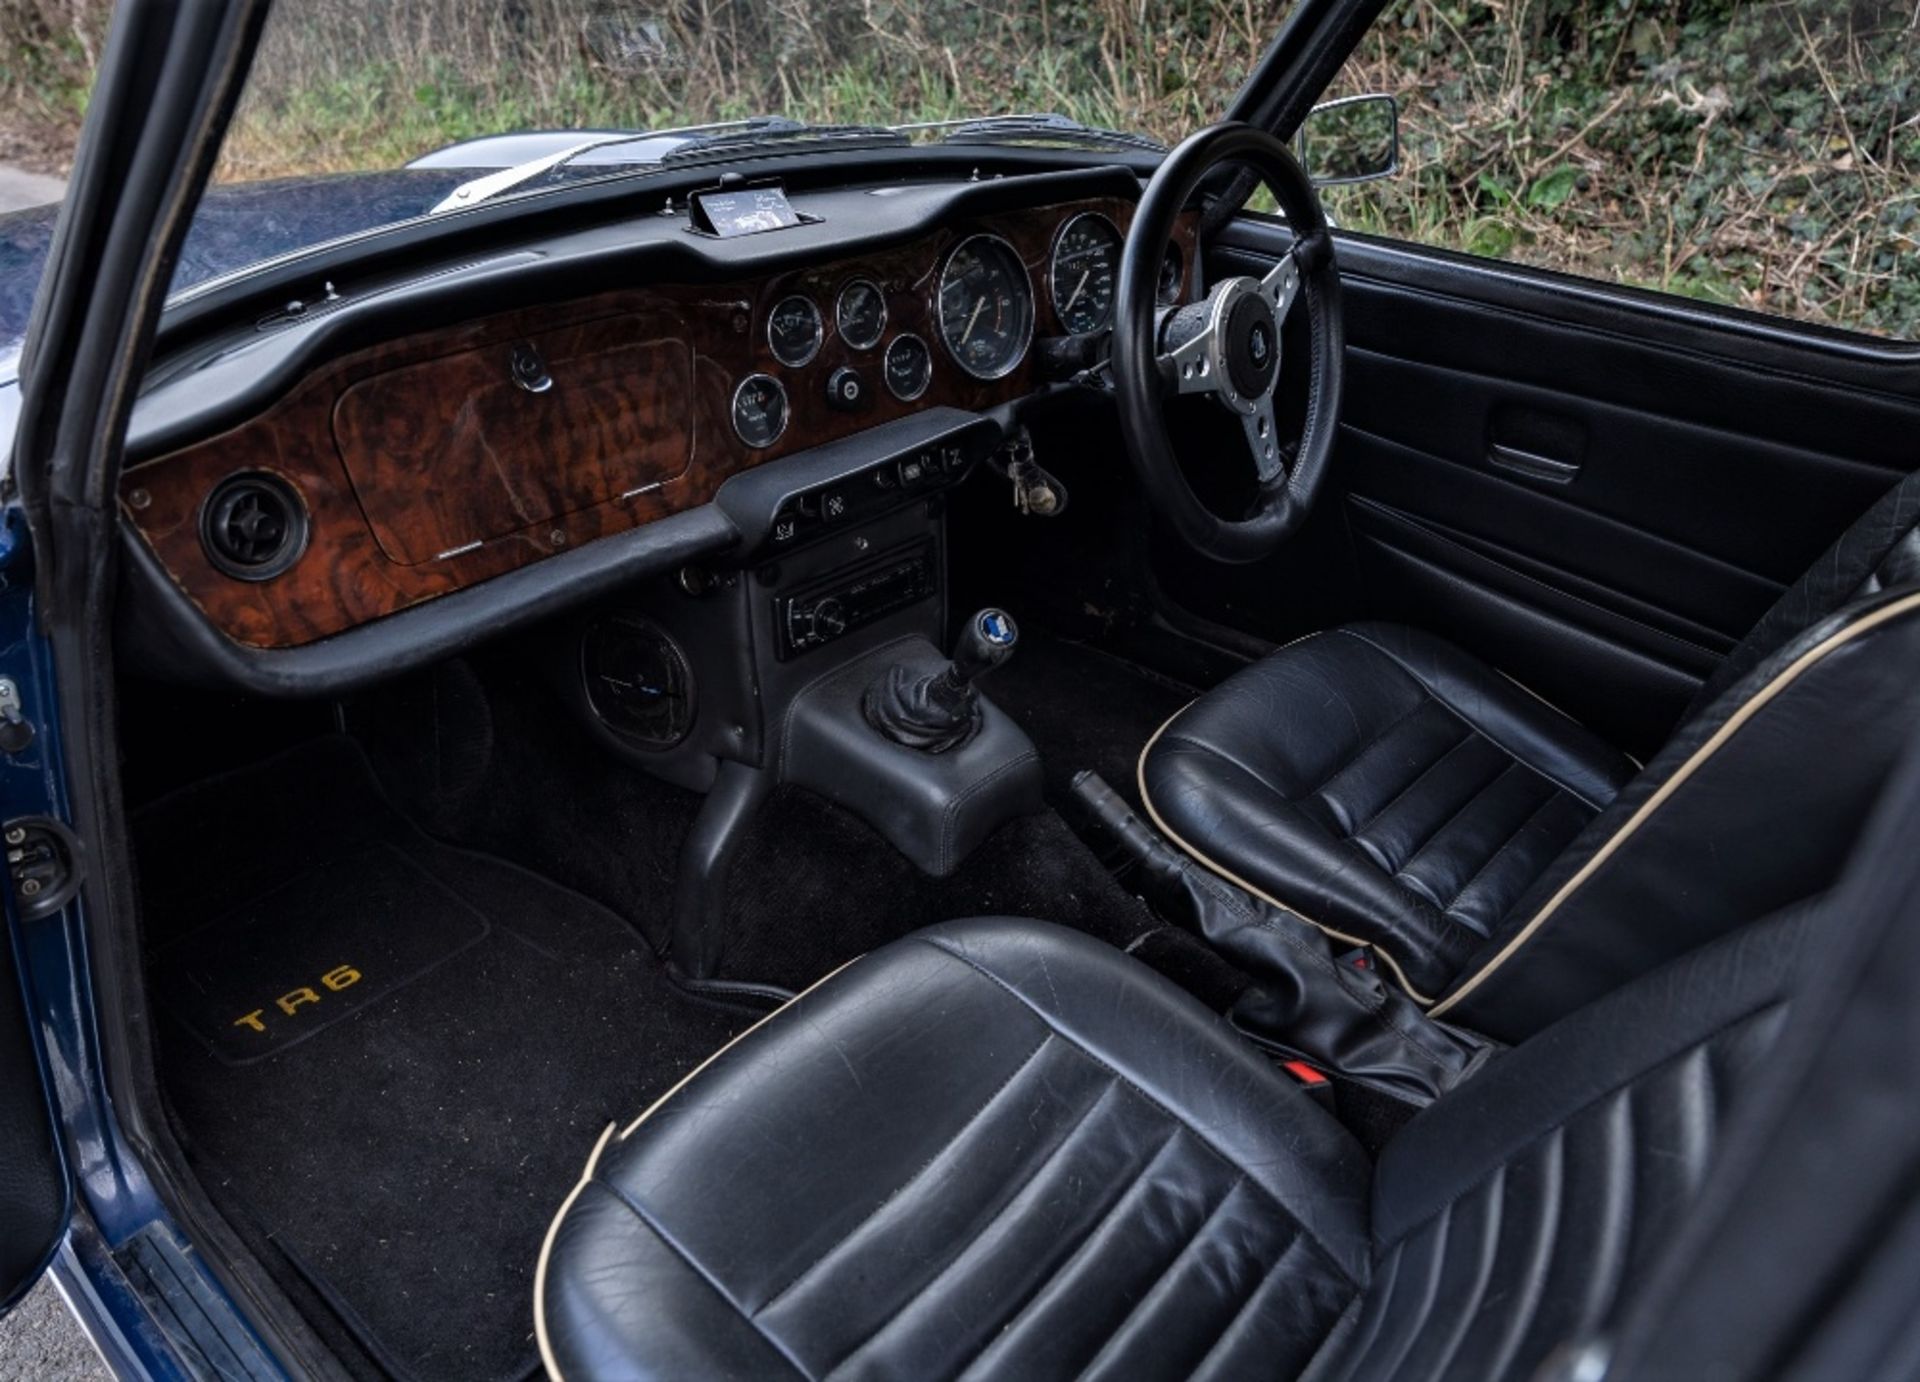 1974 TRIUMPH TR6 Registration Number: CCA 154M Chassis Number: CF21486U Recorded Mileage: c.15,000 - Image 10 of 16